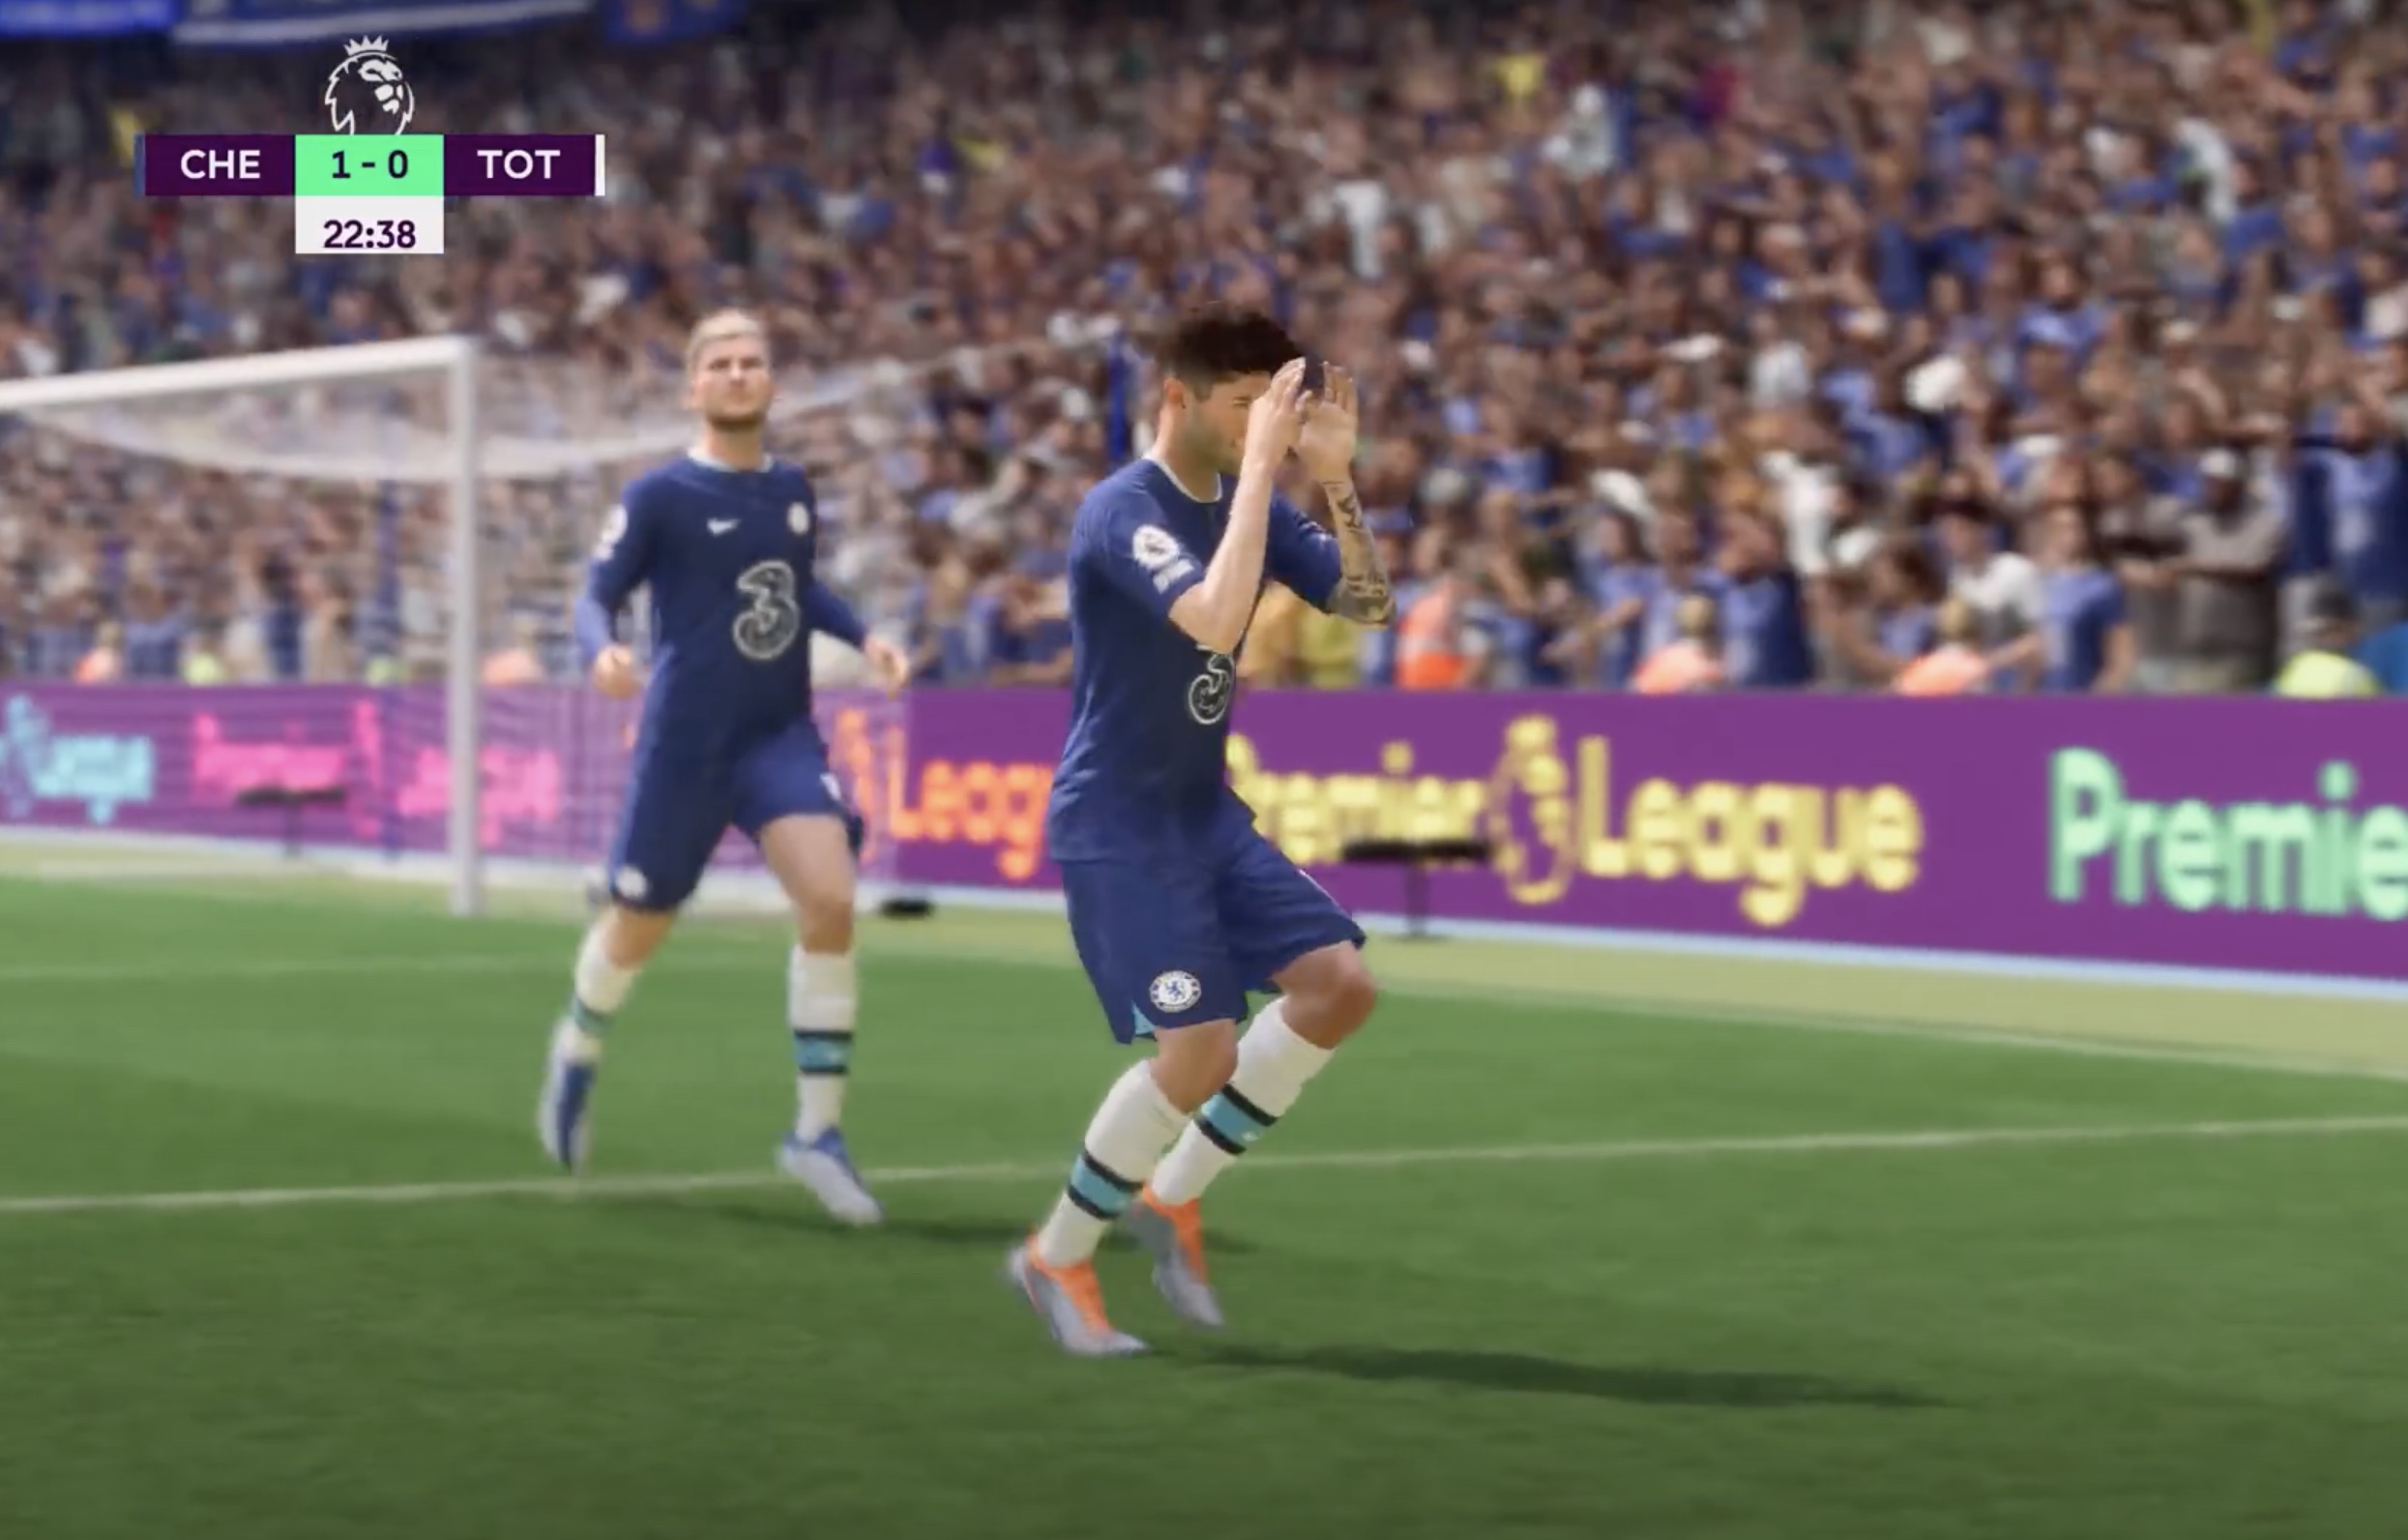 FIFA 23 - Best Keyboard Controls and How To Change on PC